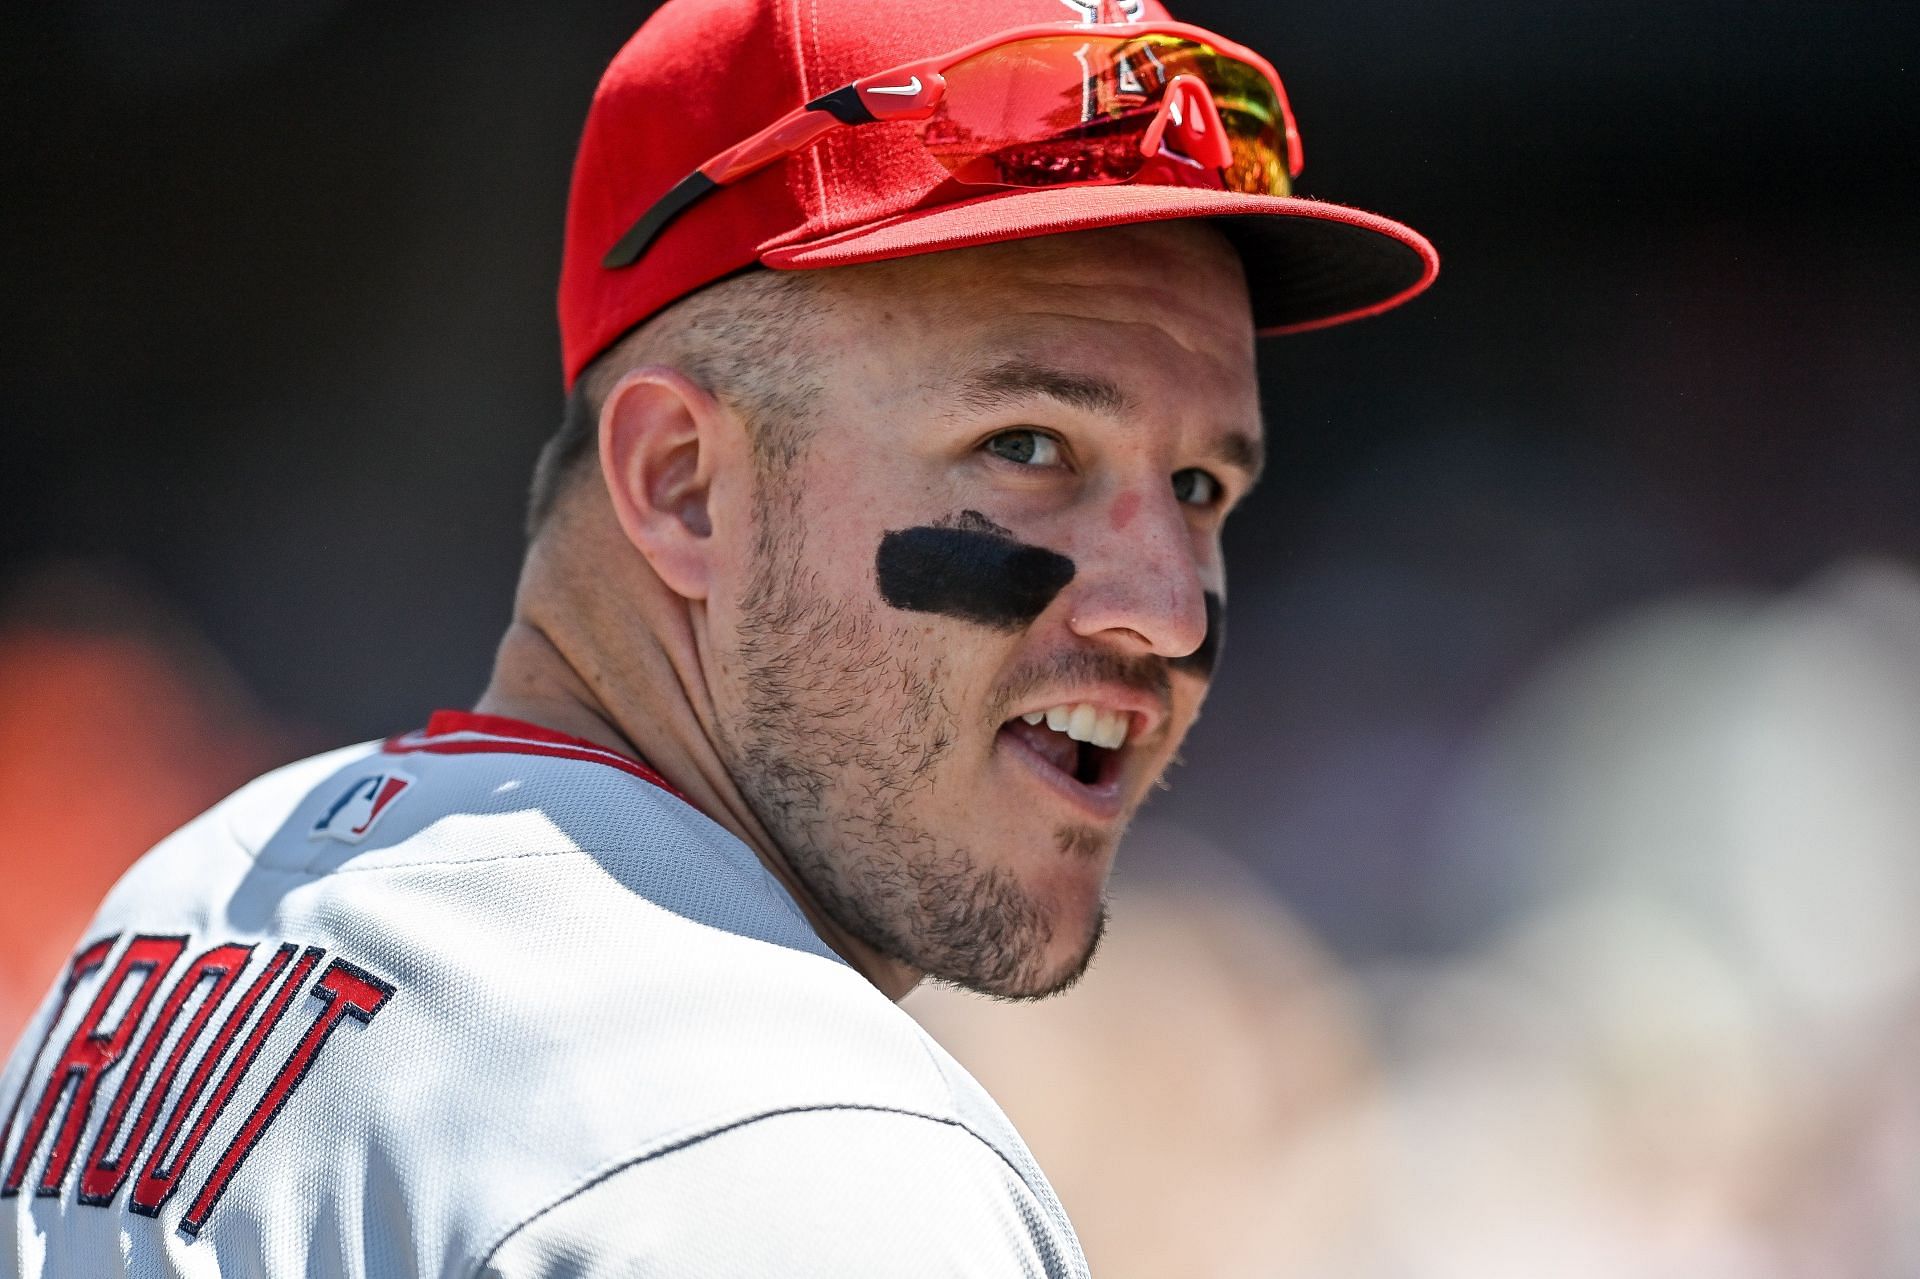 Mike Trout of the Los Angeles Angels looks on during a game against the Colorado Rockies at Coors Field